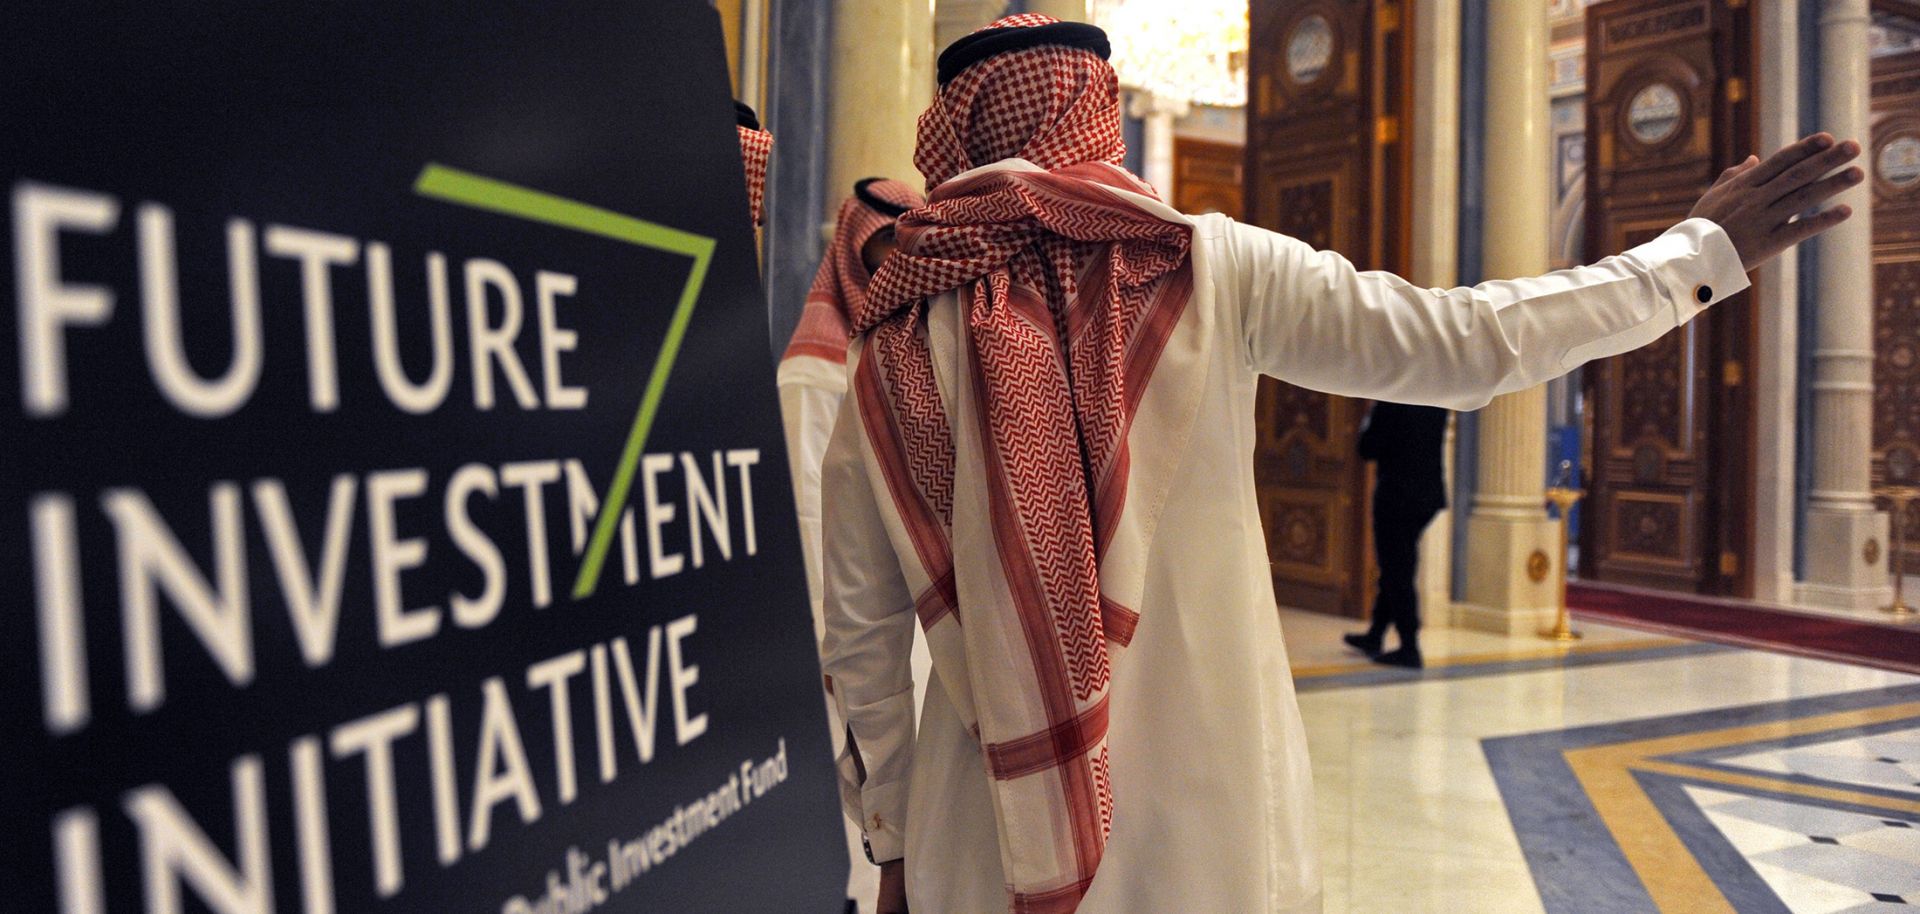 A Saudi man gestures near a sign at the start of the three-day Future Investment Initiative in Riyadh on Oct. 23, 2018.